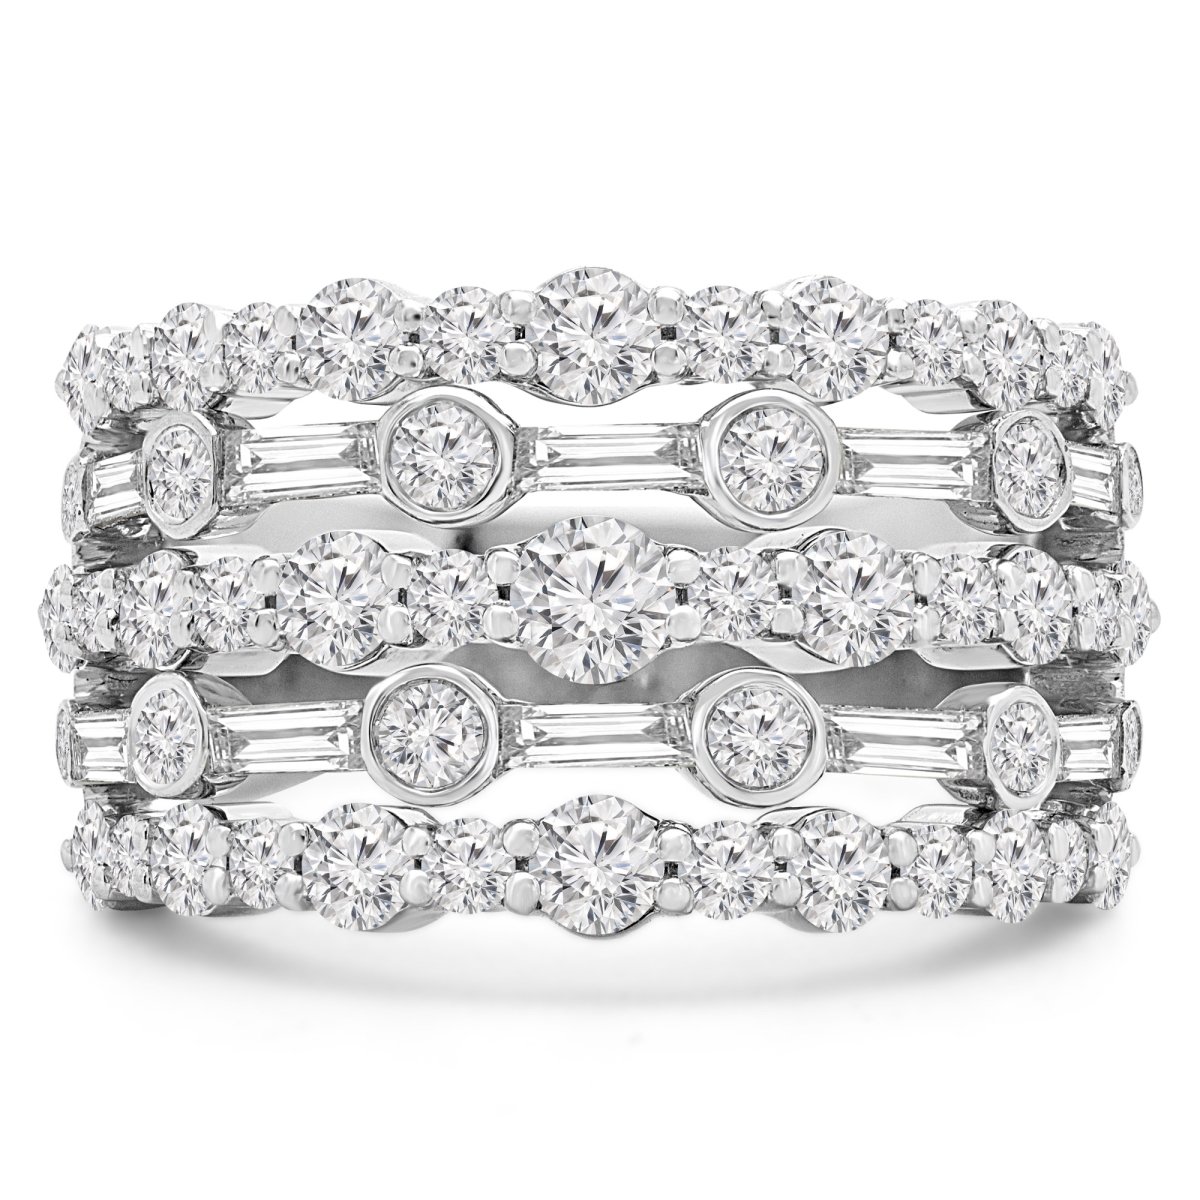 2.125 Ctw Round Diamond Vintage Five-row Cocktail Ring In 18k White Gold - Size 3